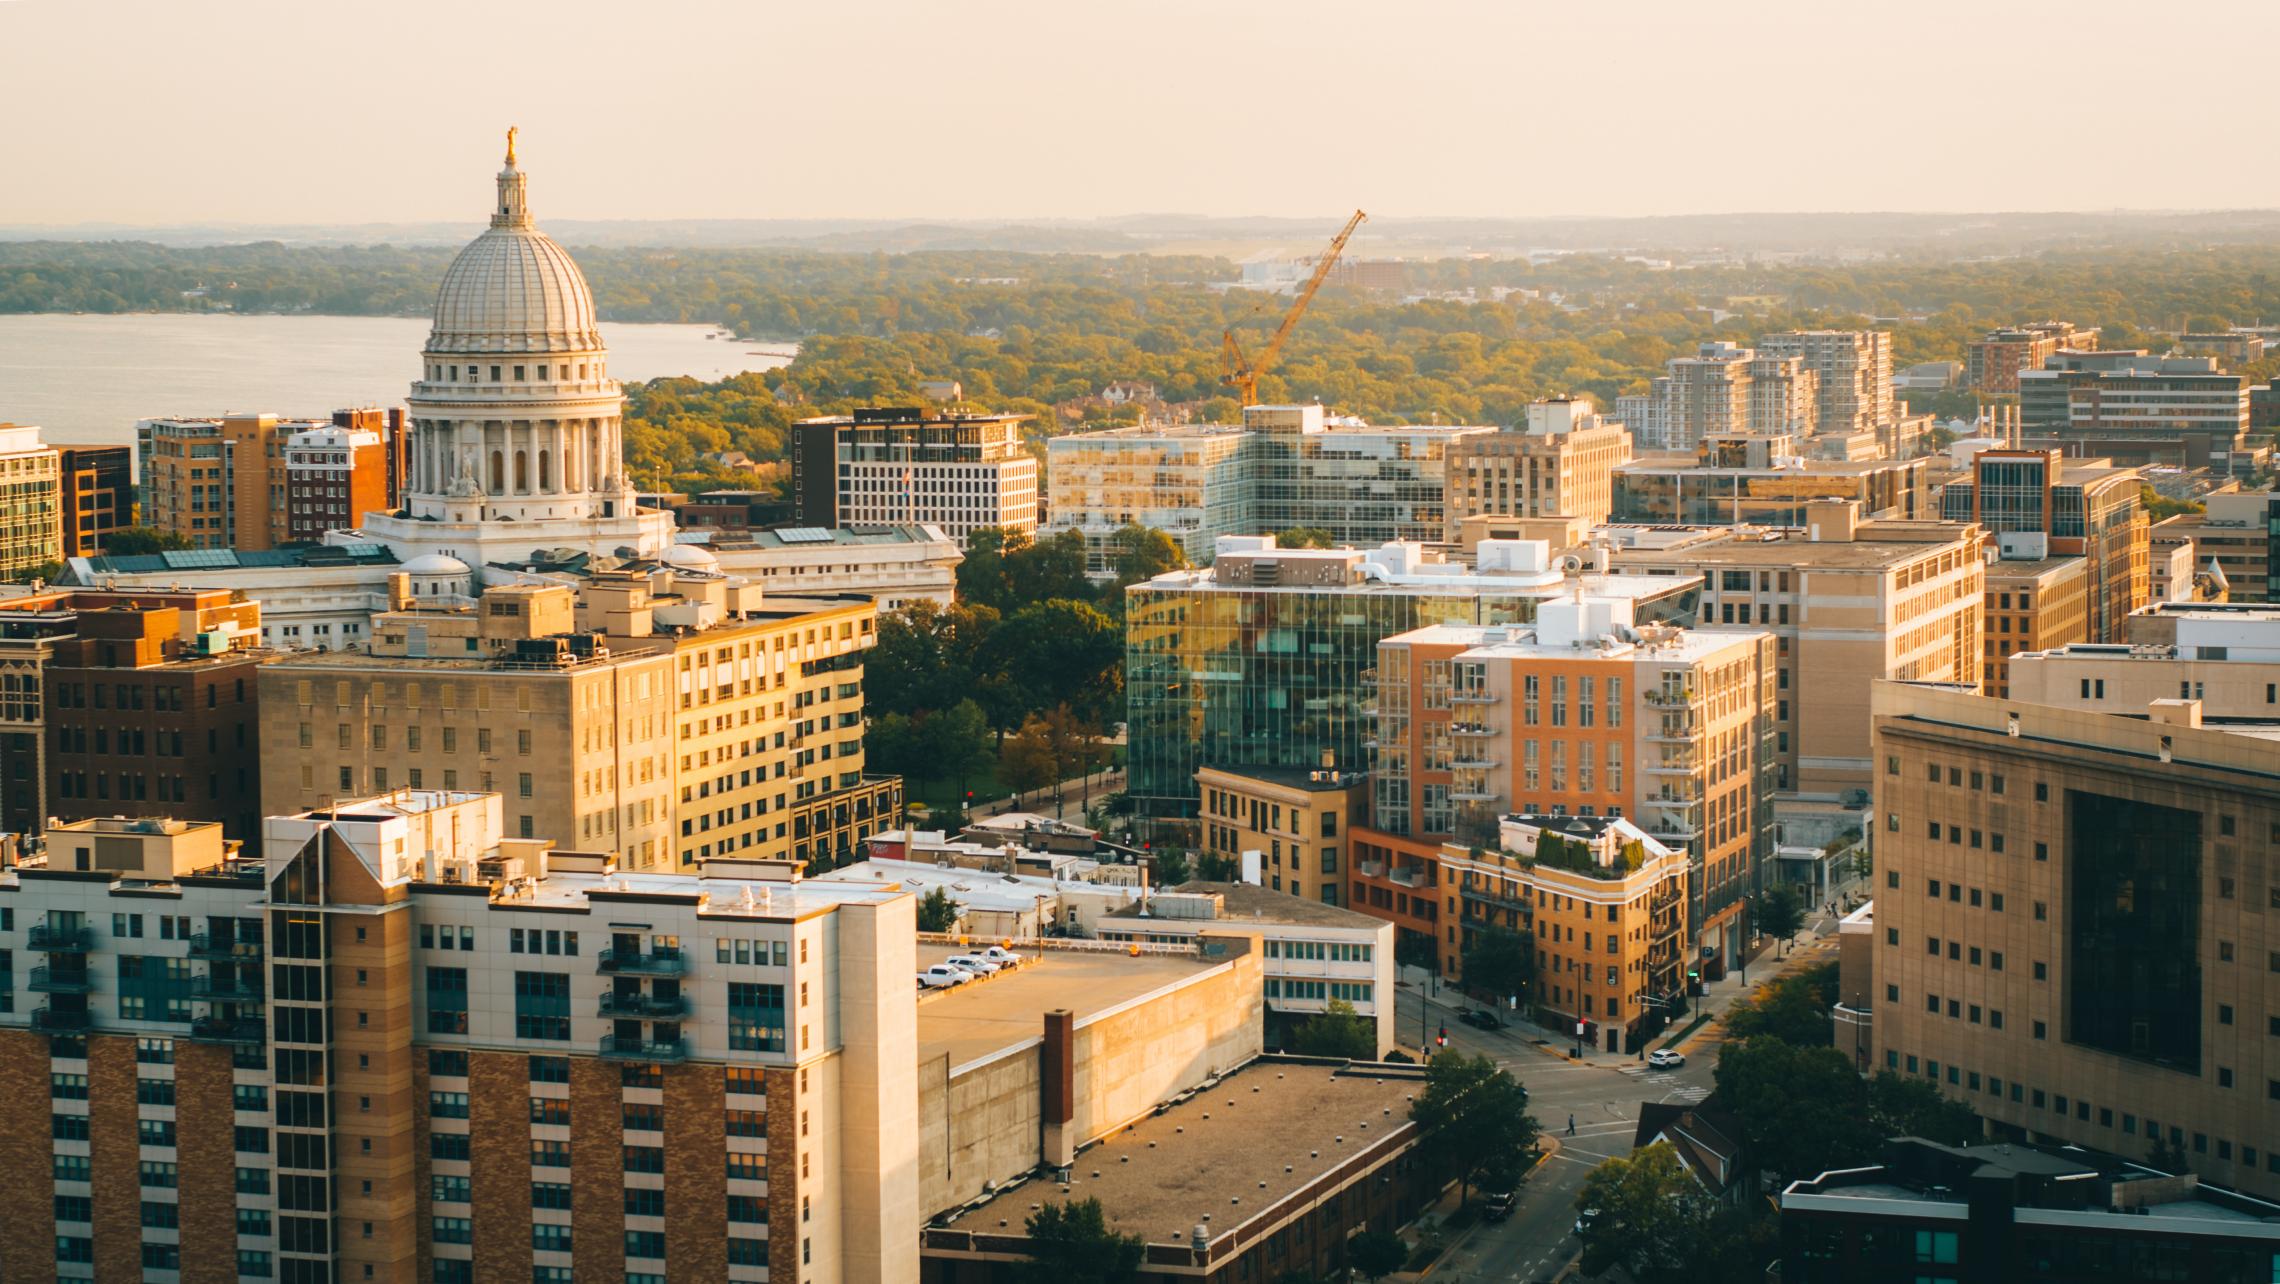 Pressman-Apartments-One-Two-Bedroom-Balcony-City-View-Luxury-Downtown-Upscale-Modern-Downtown-Madison-Capitol-Square-Lake-Views-Lifestyle-Dogs-Cats-City